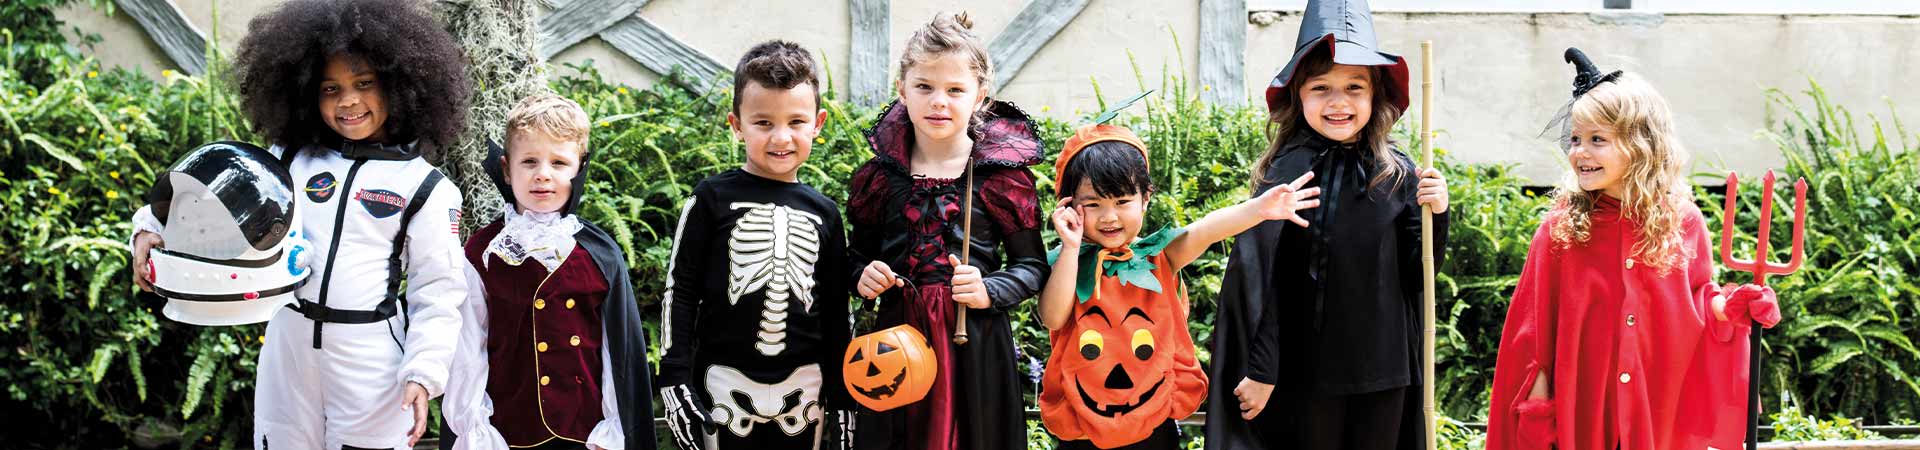 Making Halloween costumes for children: a group of children wearing different Halloween costumes.